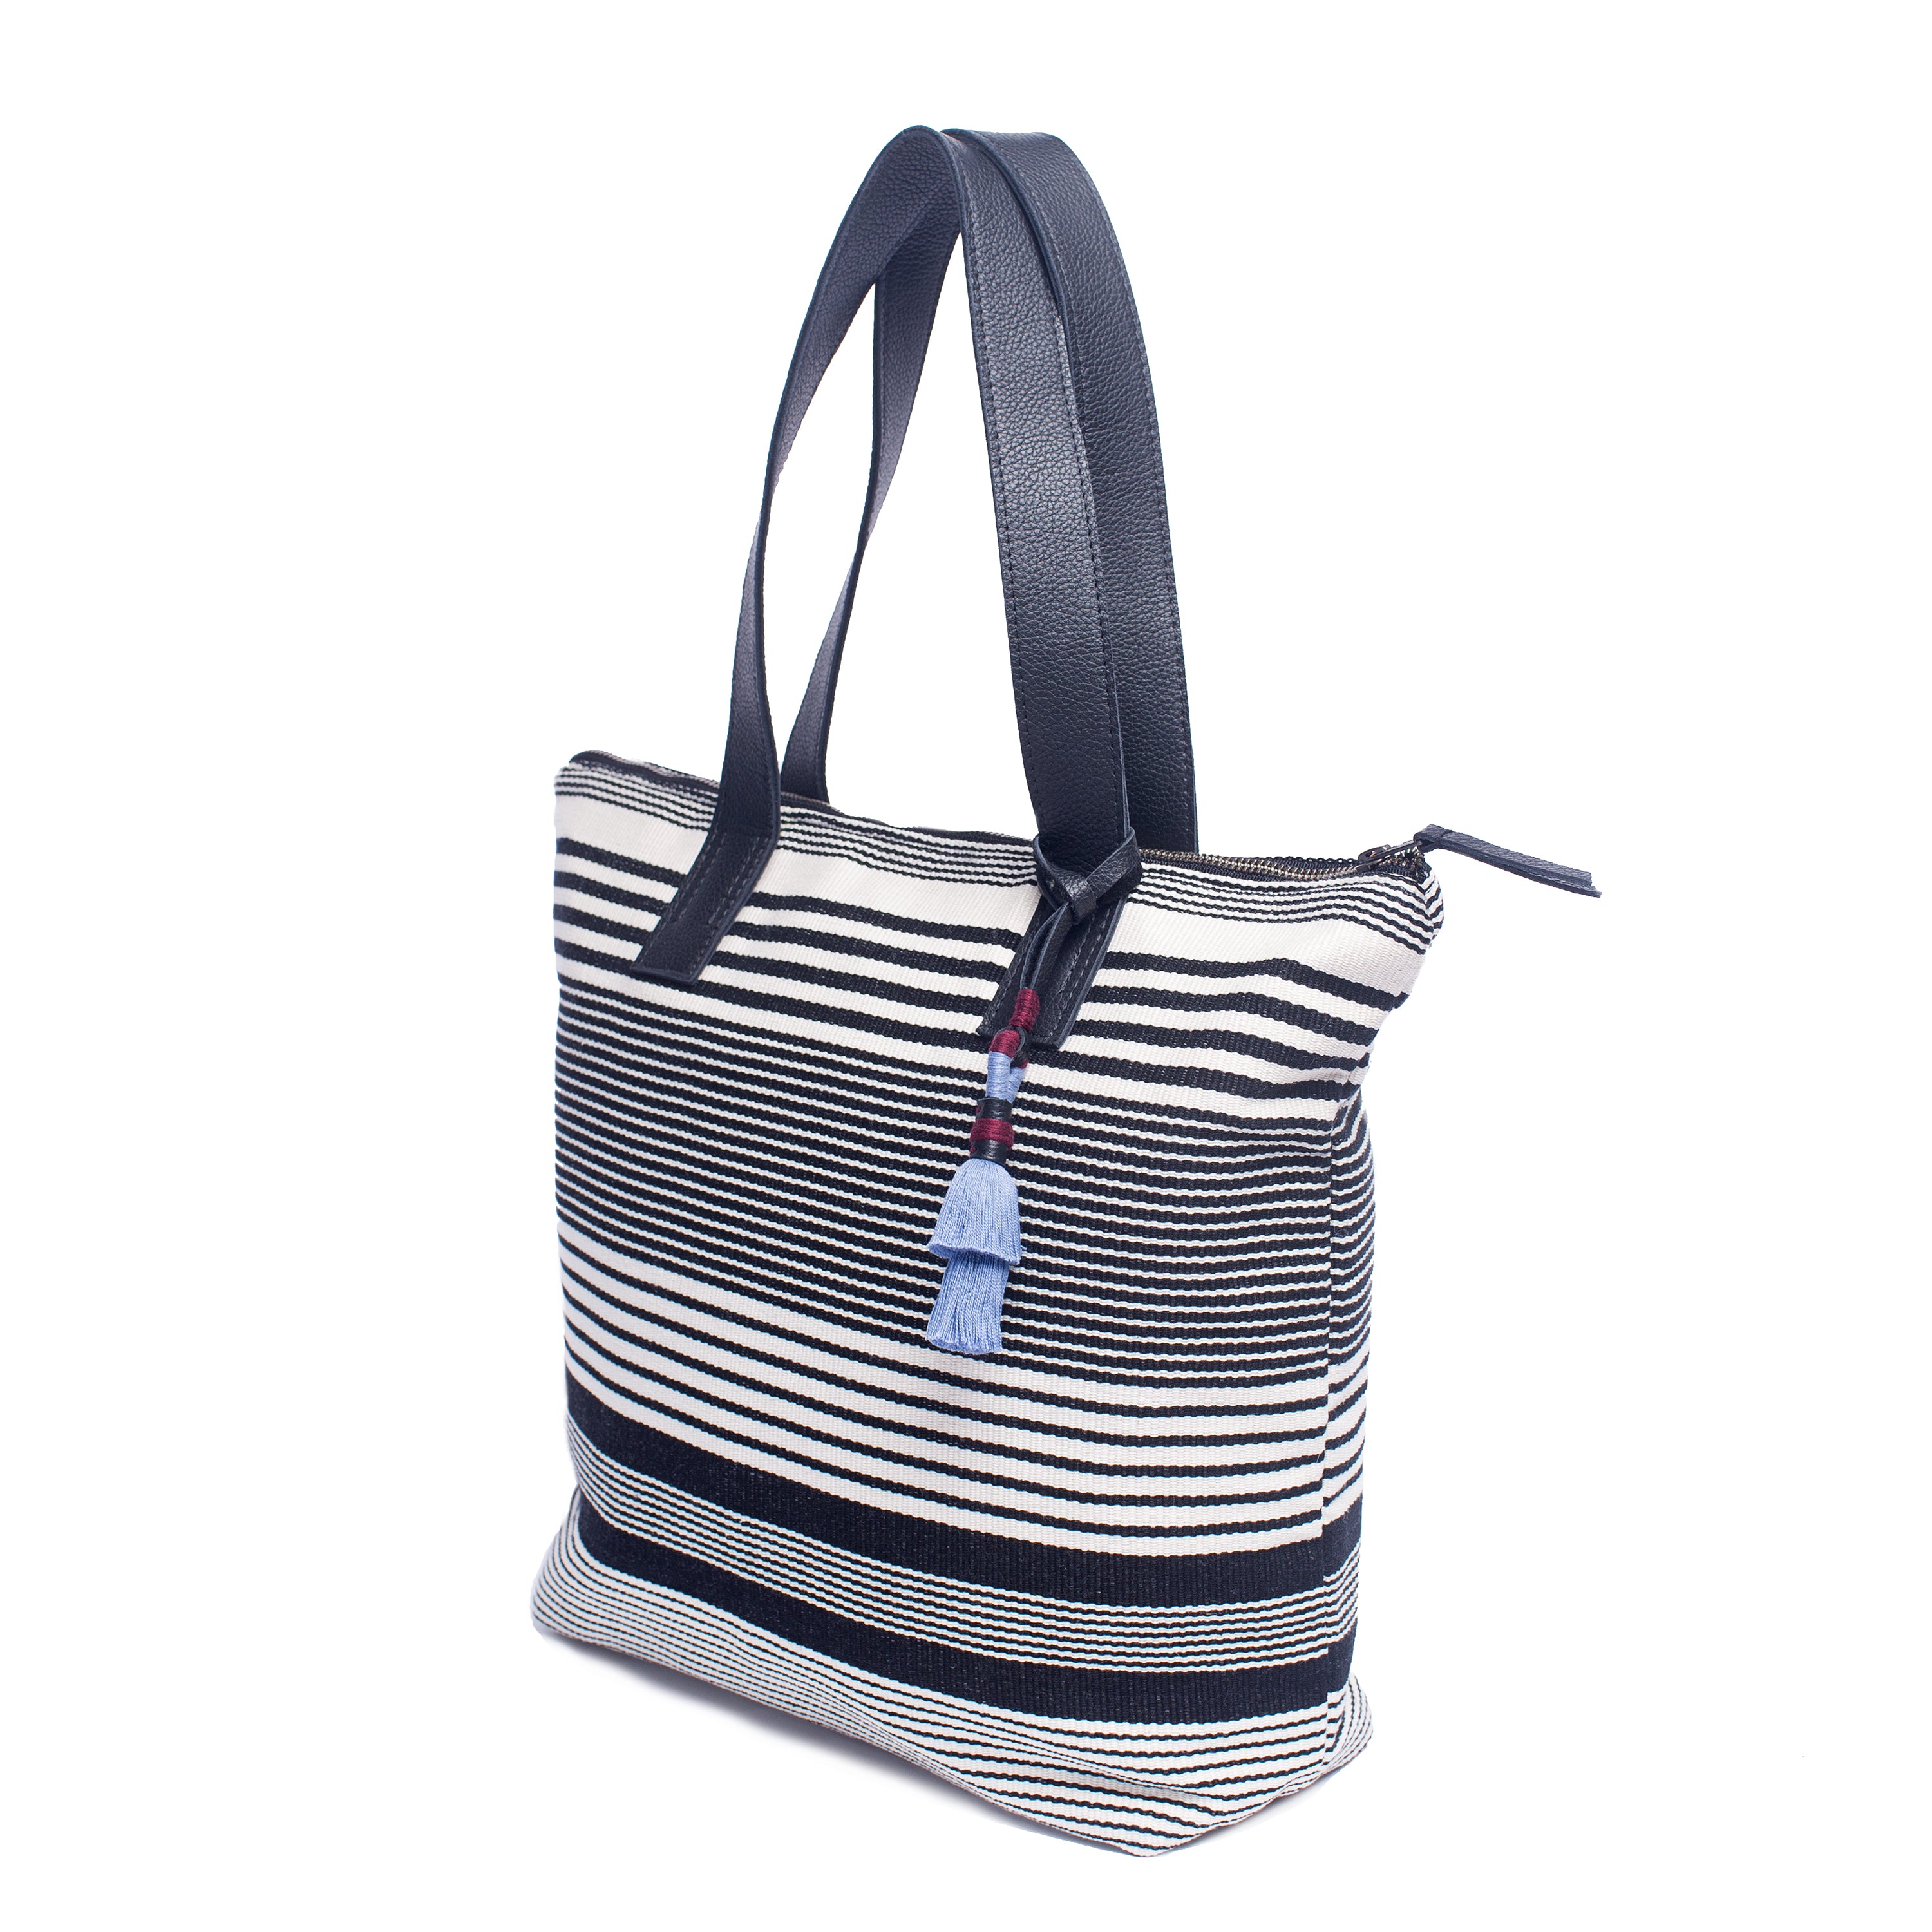 The right-sided angle of the Angela Tote in Black and White stripes. It has navy blue leather handles and a light blue tassel.